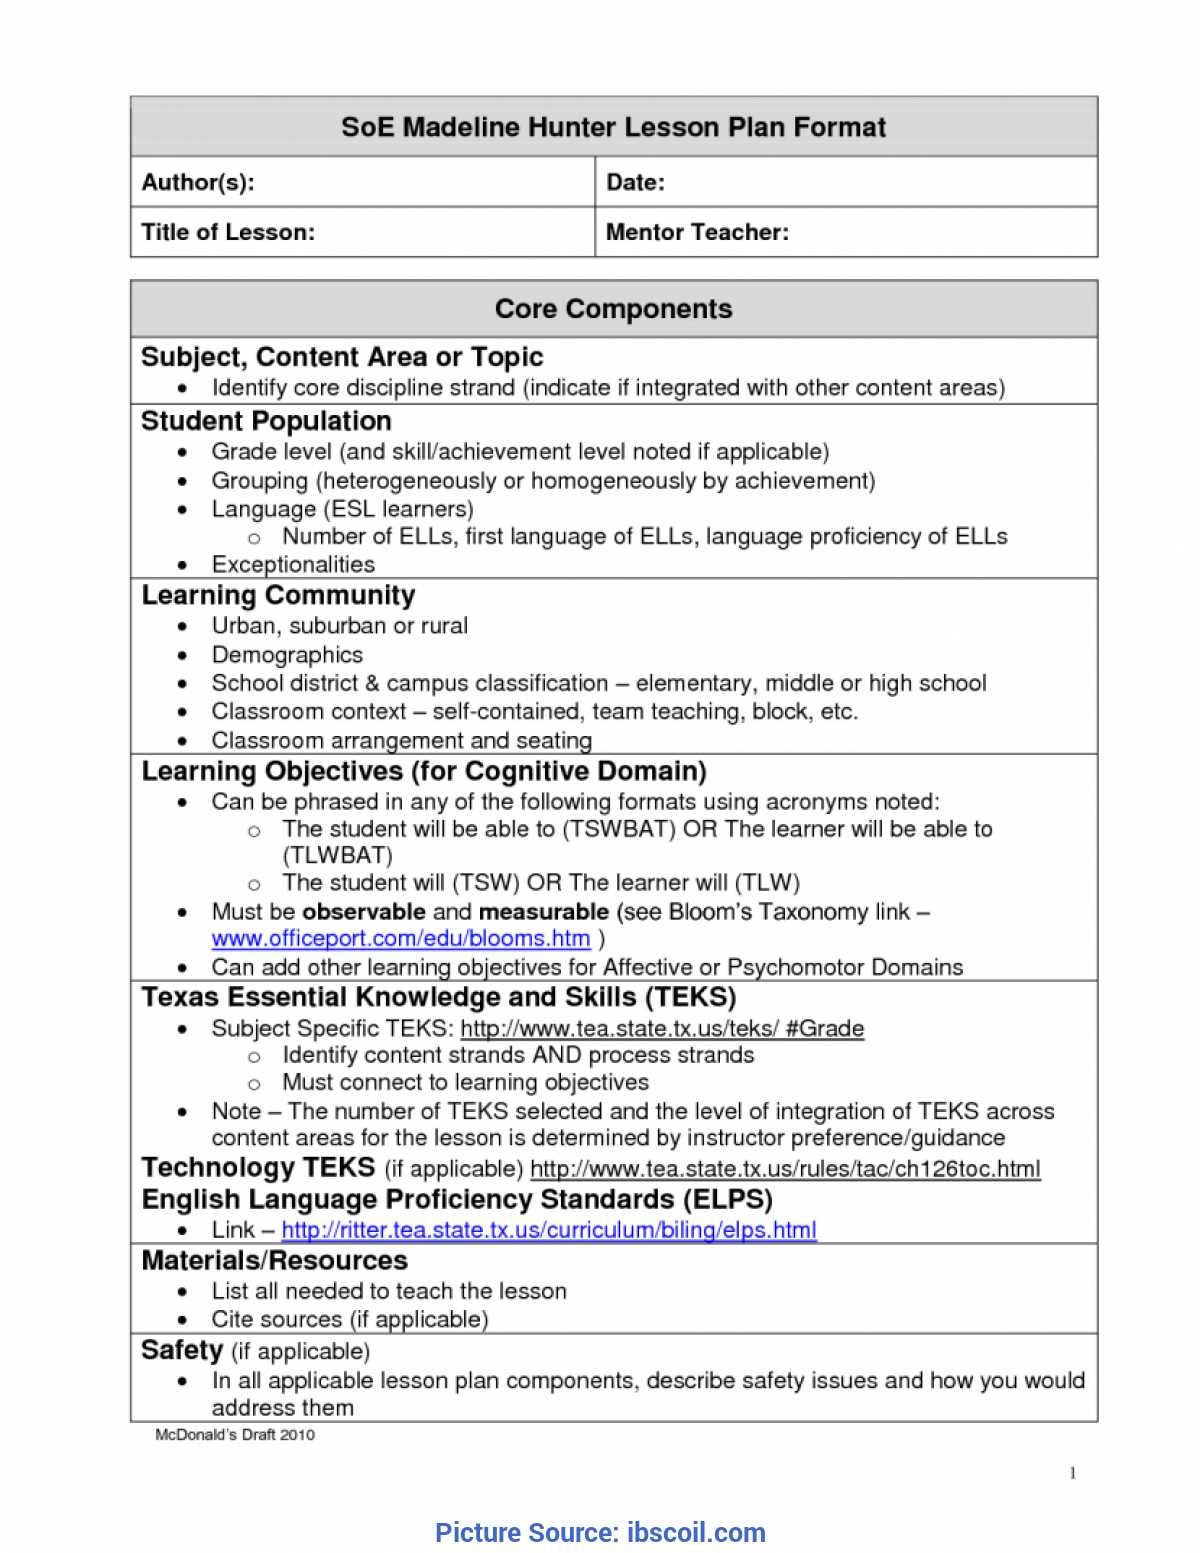 Madeline Hunter Lesson Plan Template Twiroo Com | Lesso Inside Madeline Hunter Lesson Plan Template Word